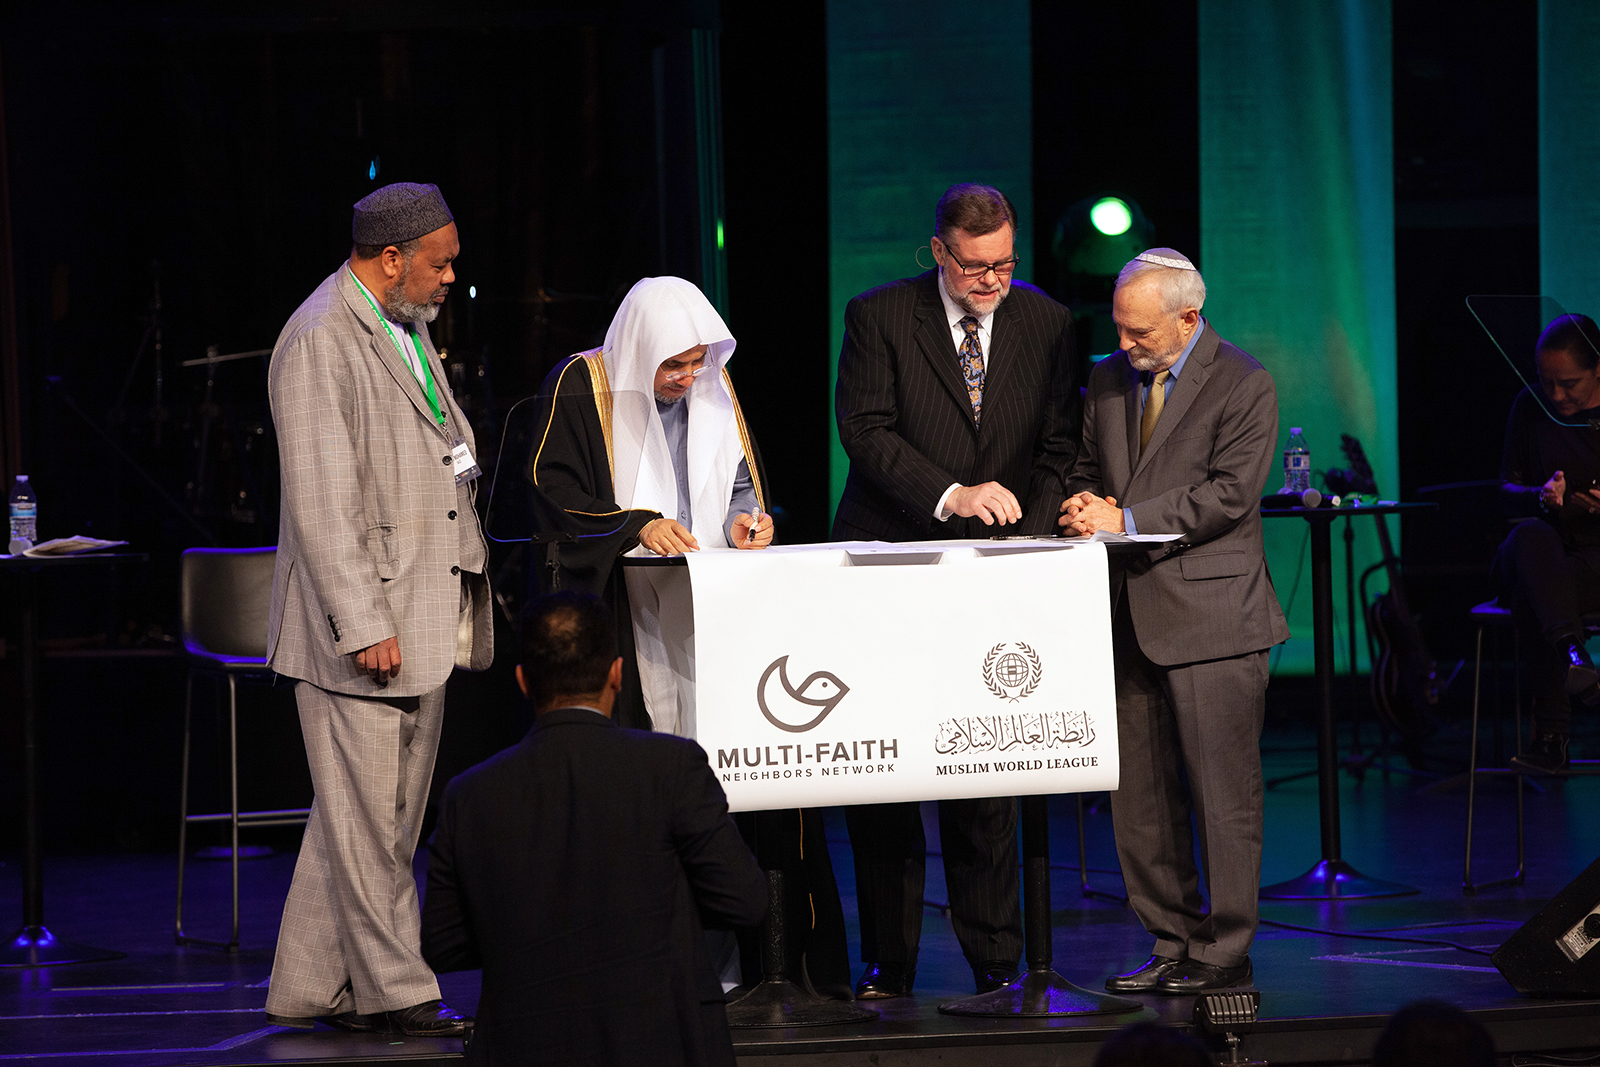 Imam Mohammed Magid, from left, Mohammad Al-Issa, Pastor Bob Roberts Jr. and Rabbi David Saperstein, all of the Multi-Faith Neighbors Network, at the Global Faith Forum at Northwood Church in Keller, Texas, March 6, 2022. (Photo courtesy of MFNN)